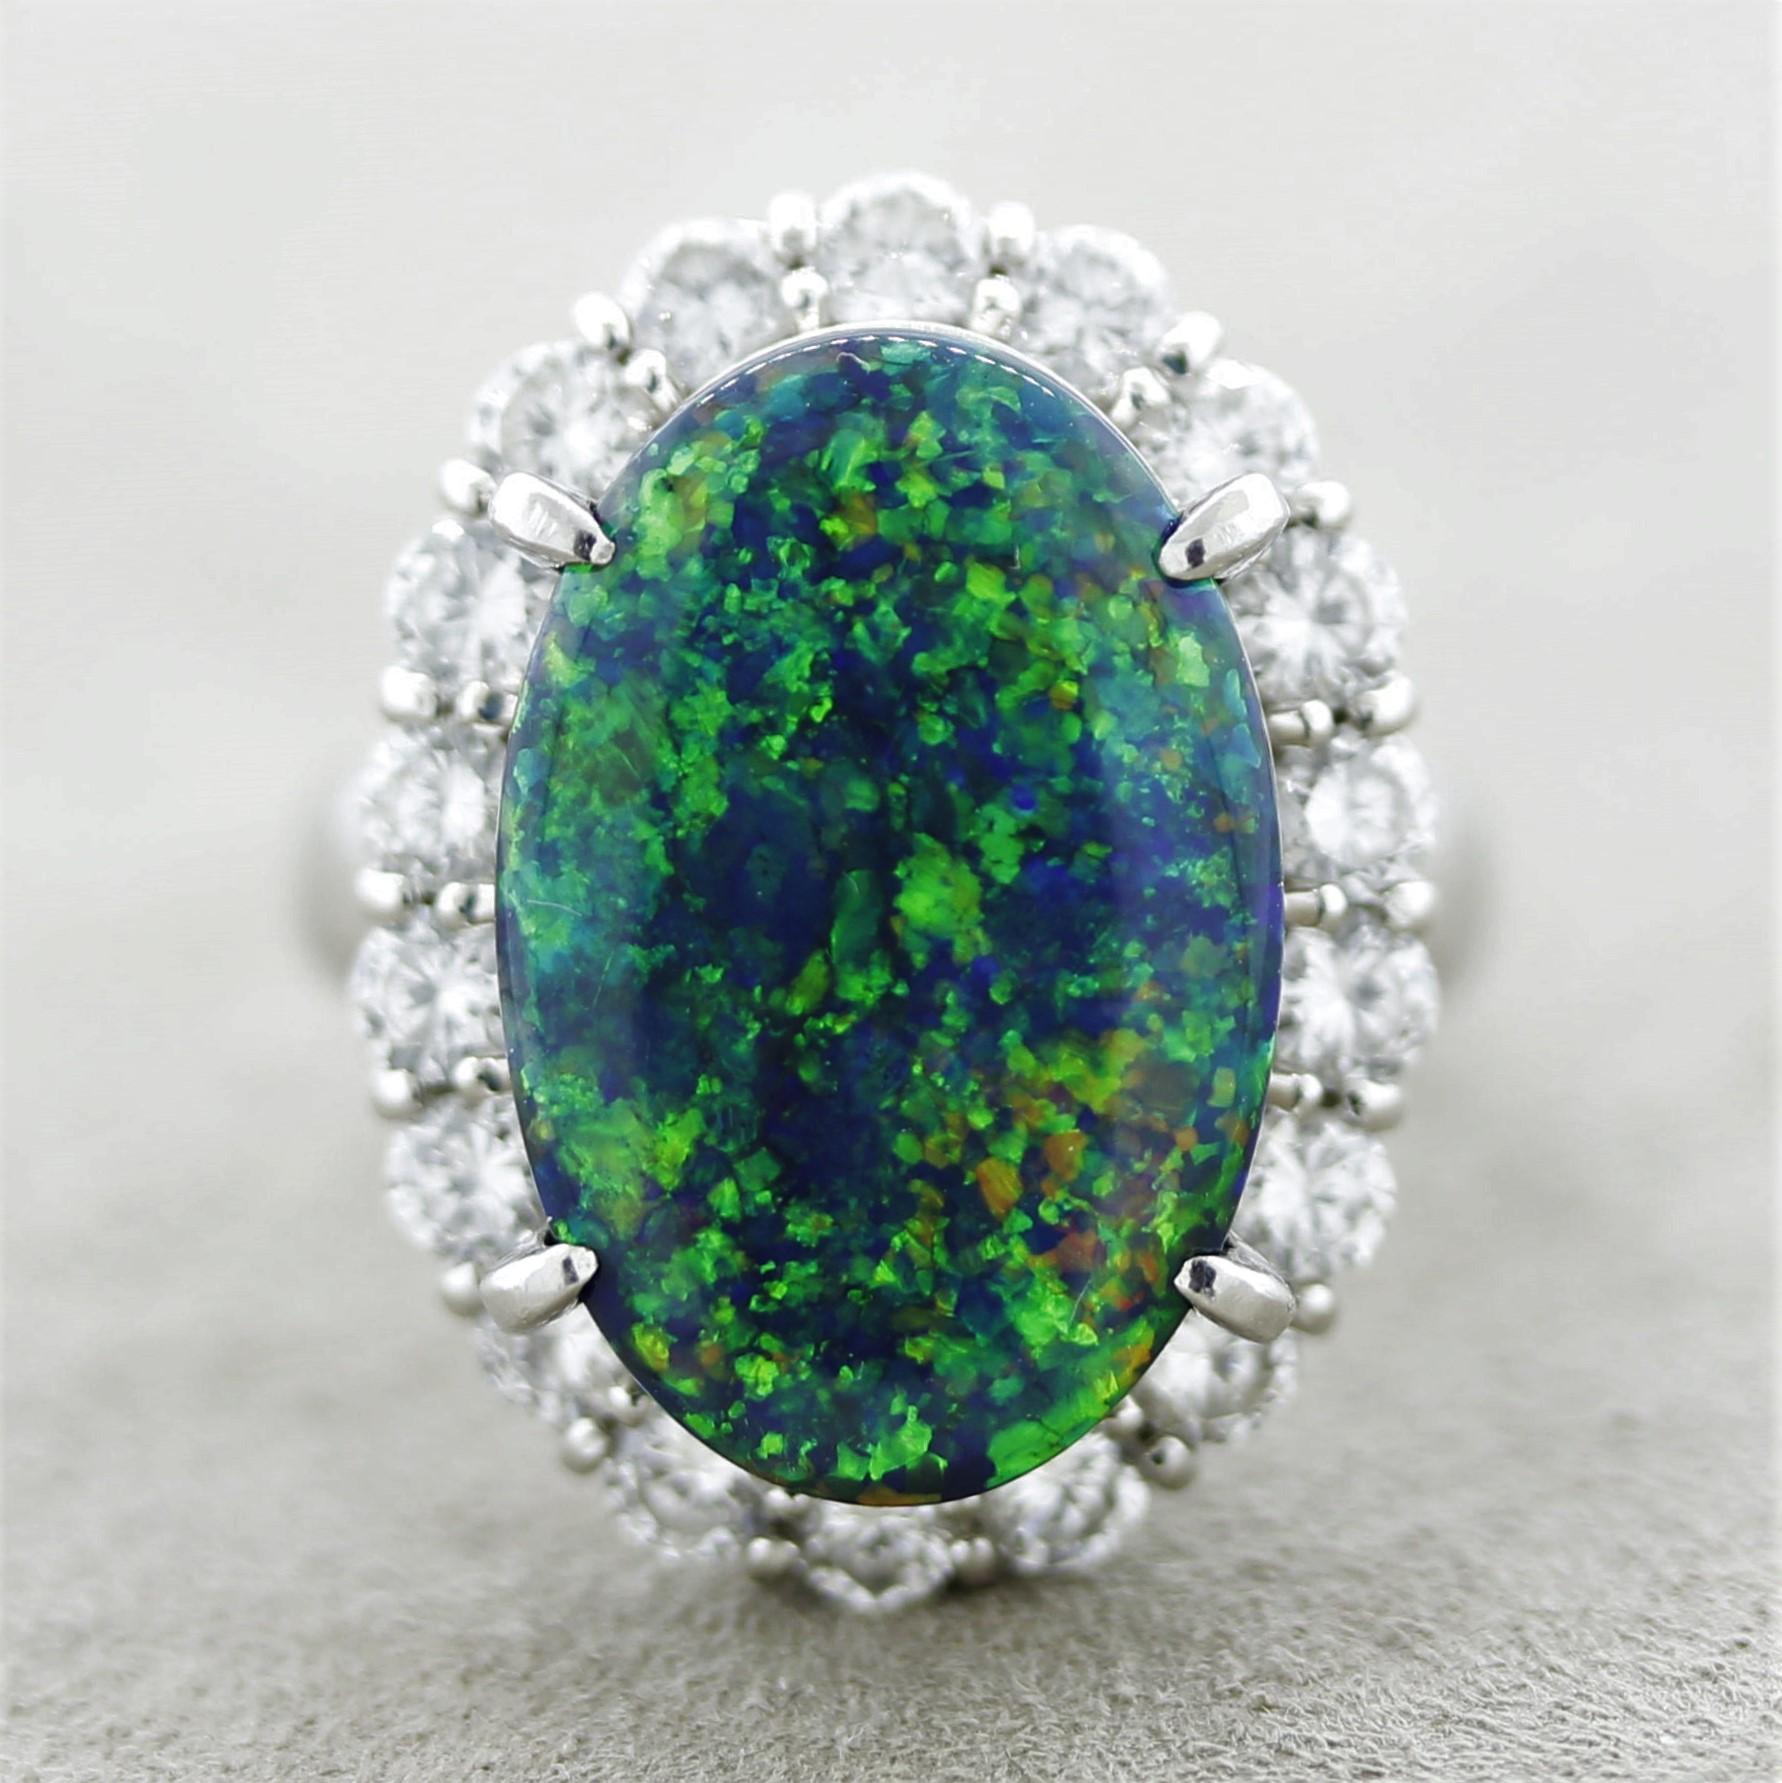 A superb gem black opal from Lightning Ridge, Australia. It weighs 7.79 carats and has excellent play-of-color and fantastic brightness. Intense vivid flashes of green, blue, orange, and yellow dance across the stone. It is complemented by 1.69